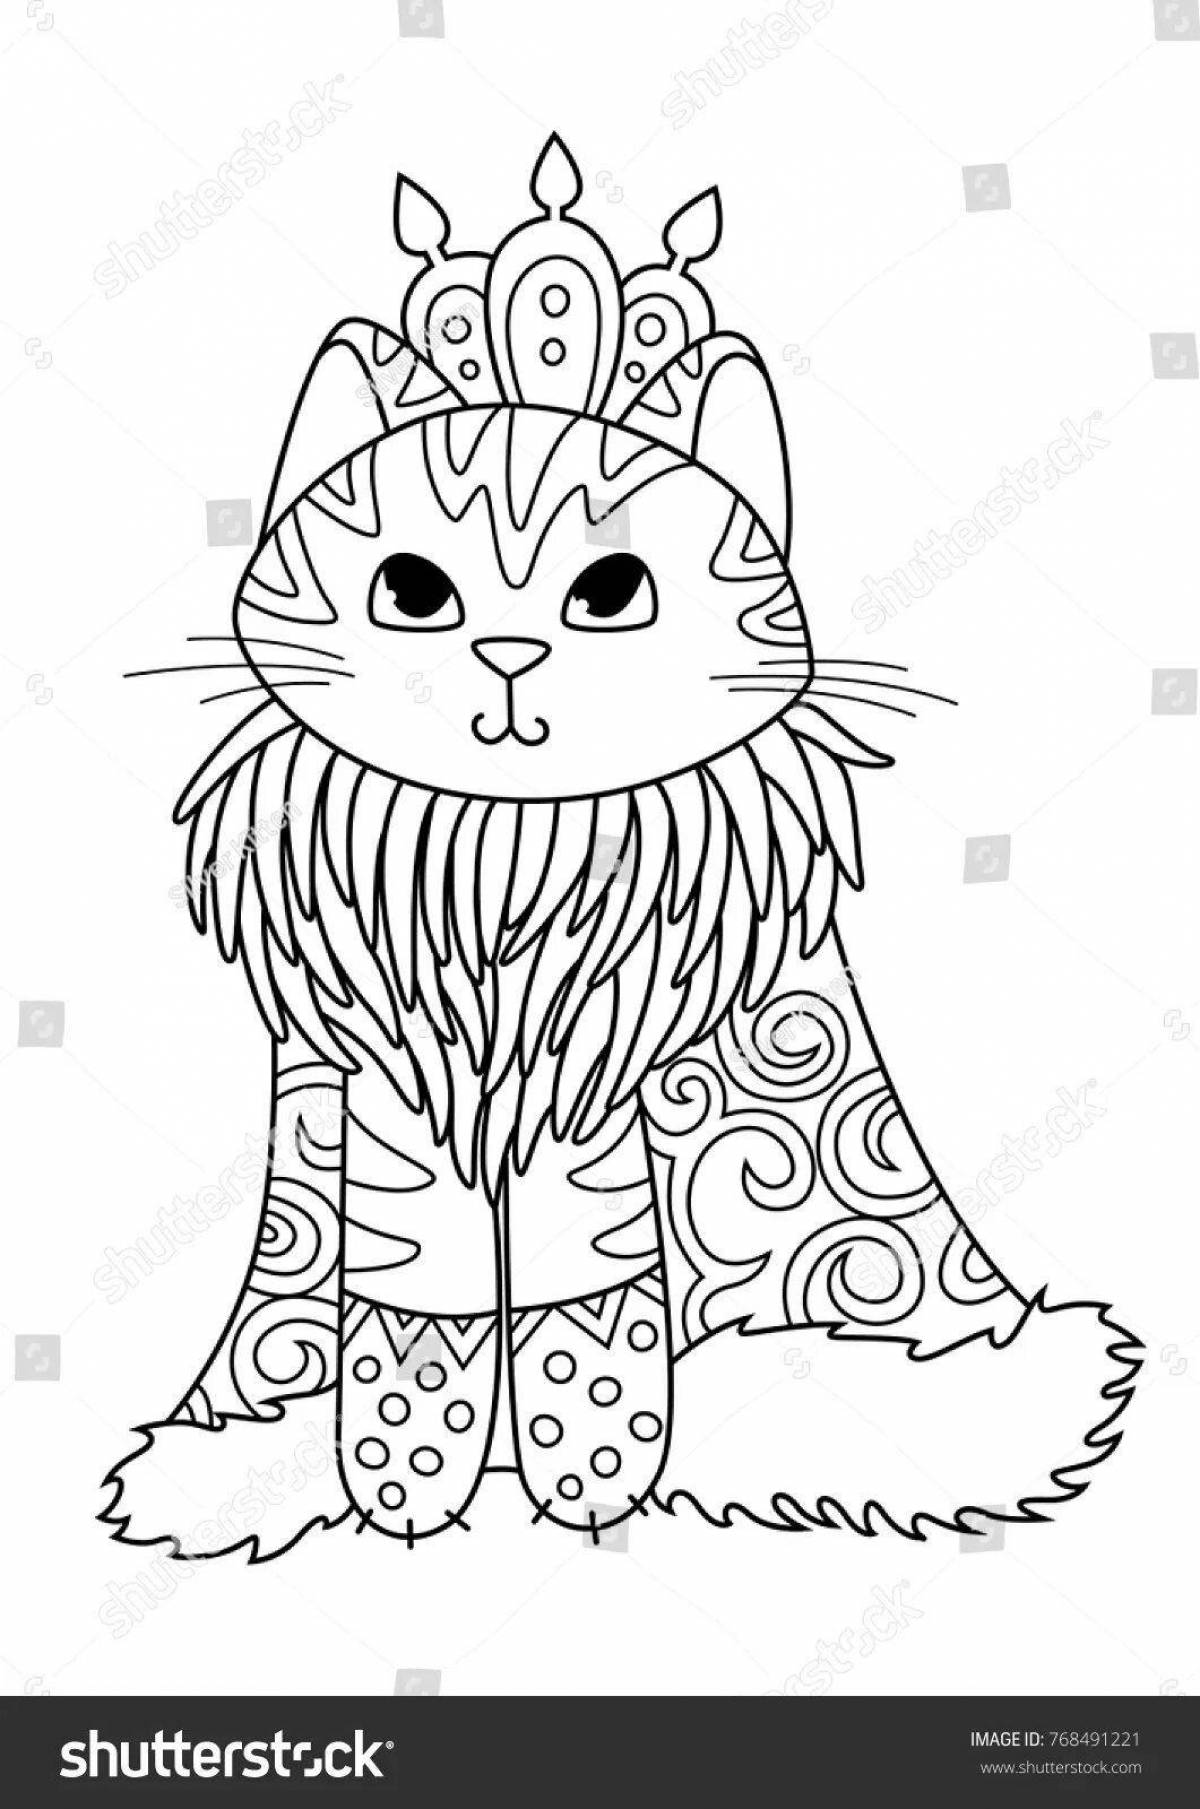 Coloring book luxury cat with a crown